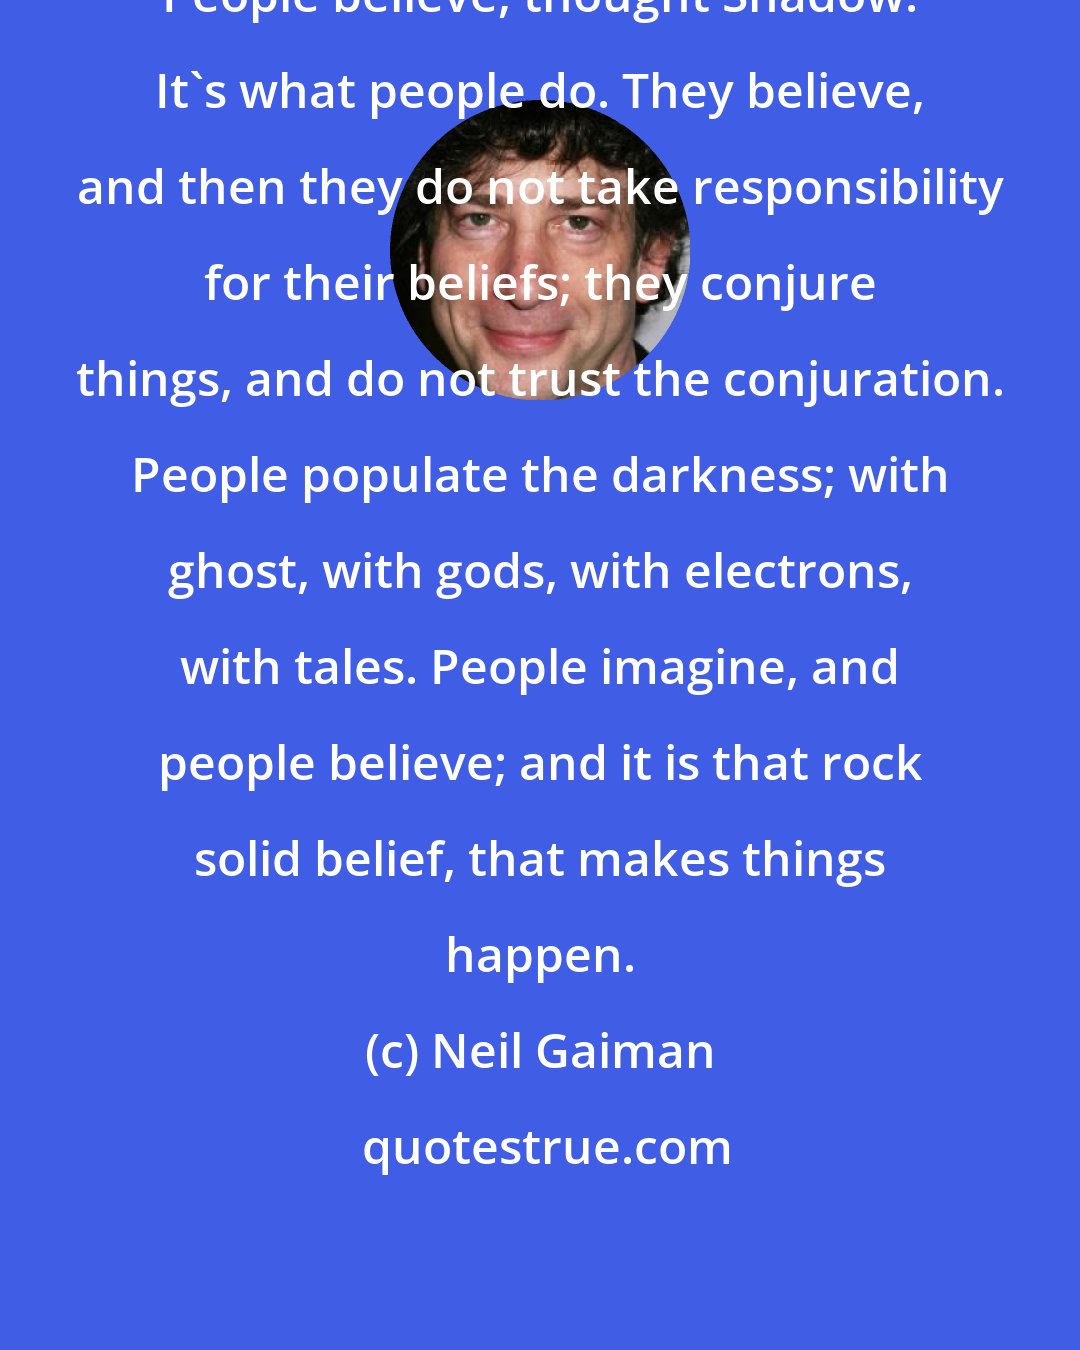 Neil Gaiman: People believe, thought Shadow. It's what people do. They believe, and then they do not take responsibility for their beliefs; they conjure things, and do not trust the conjuration. People populate the darkness; with ghost, with gods, with electrons, with tales. People imagine, and people believe; and it is that rock solid belief, that makes things happen.